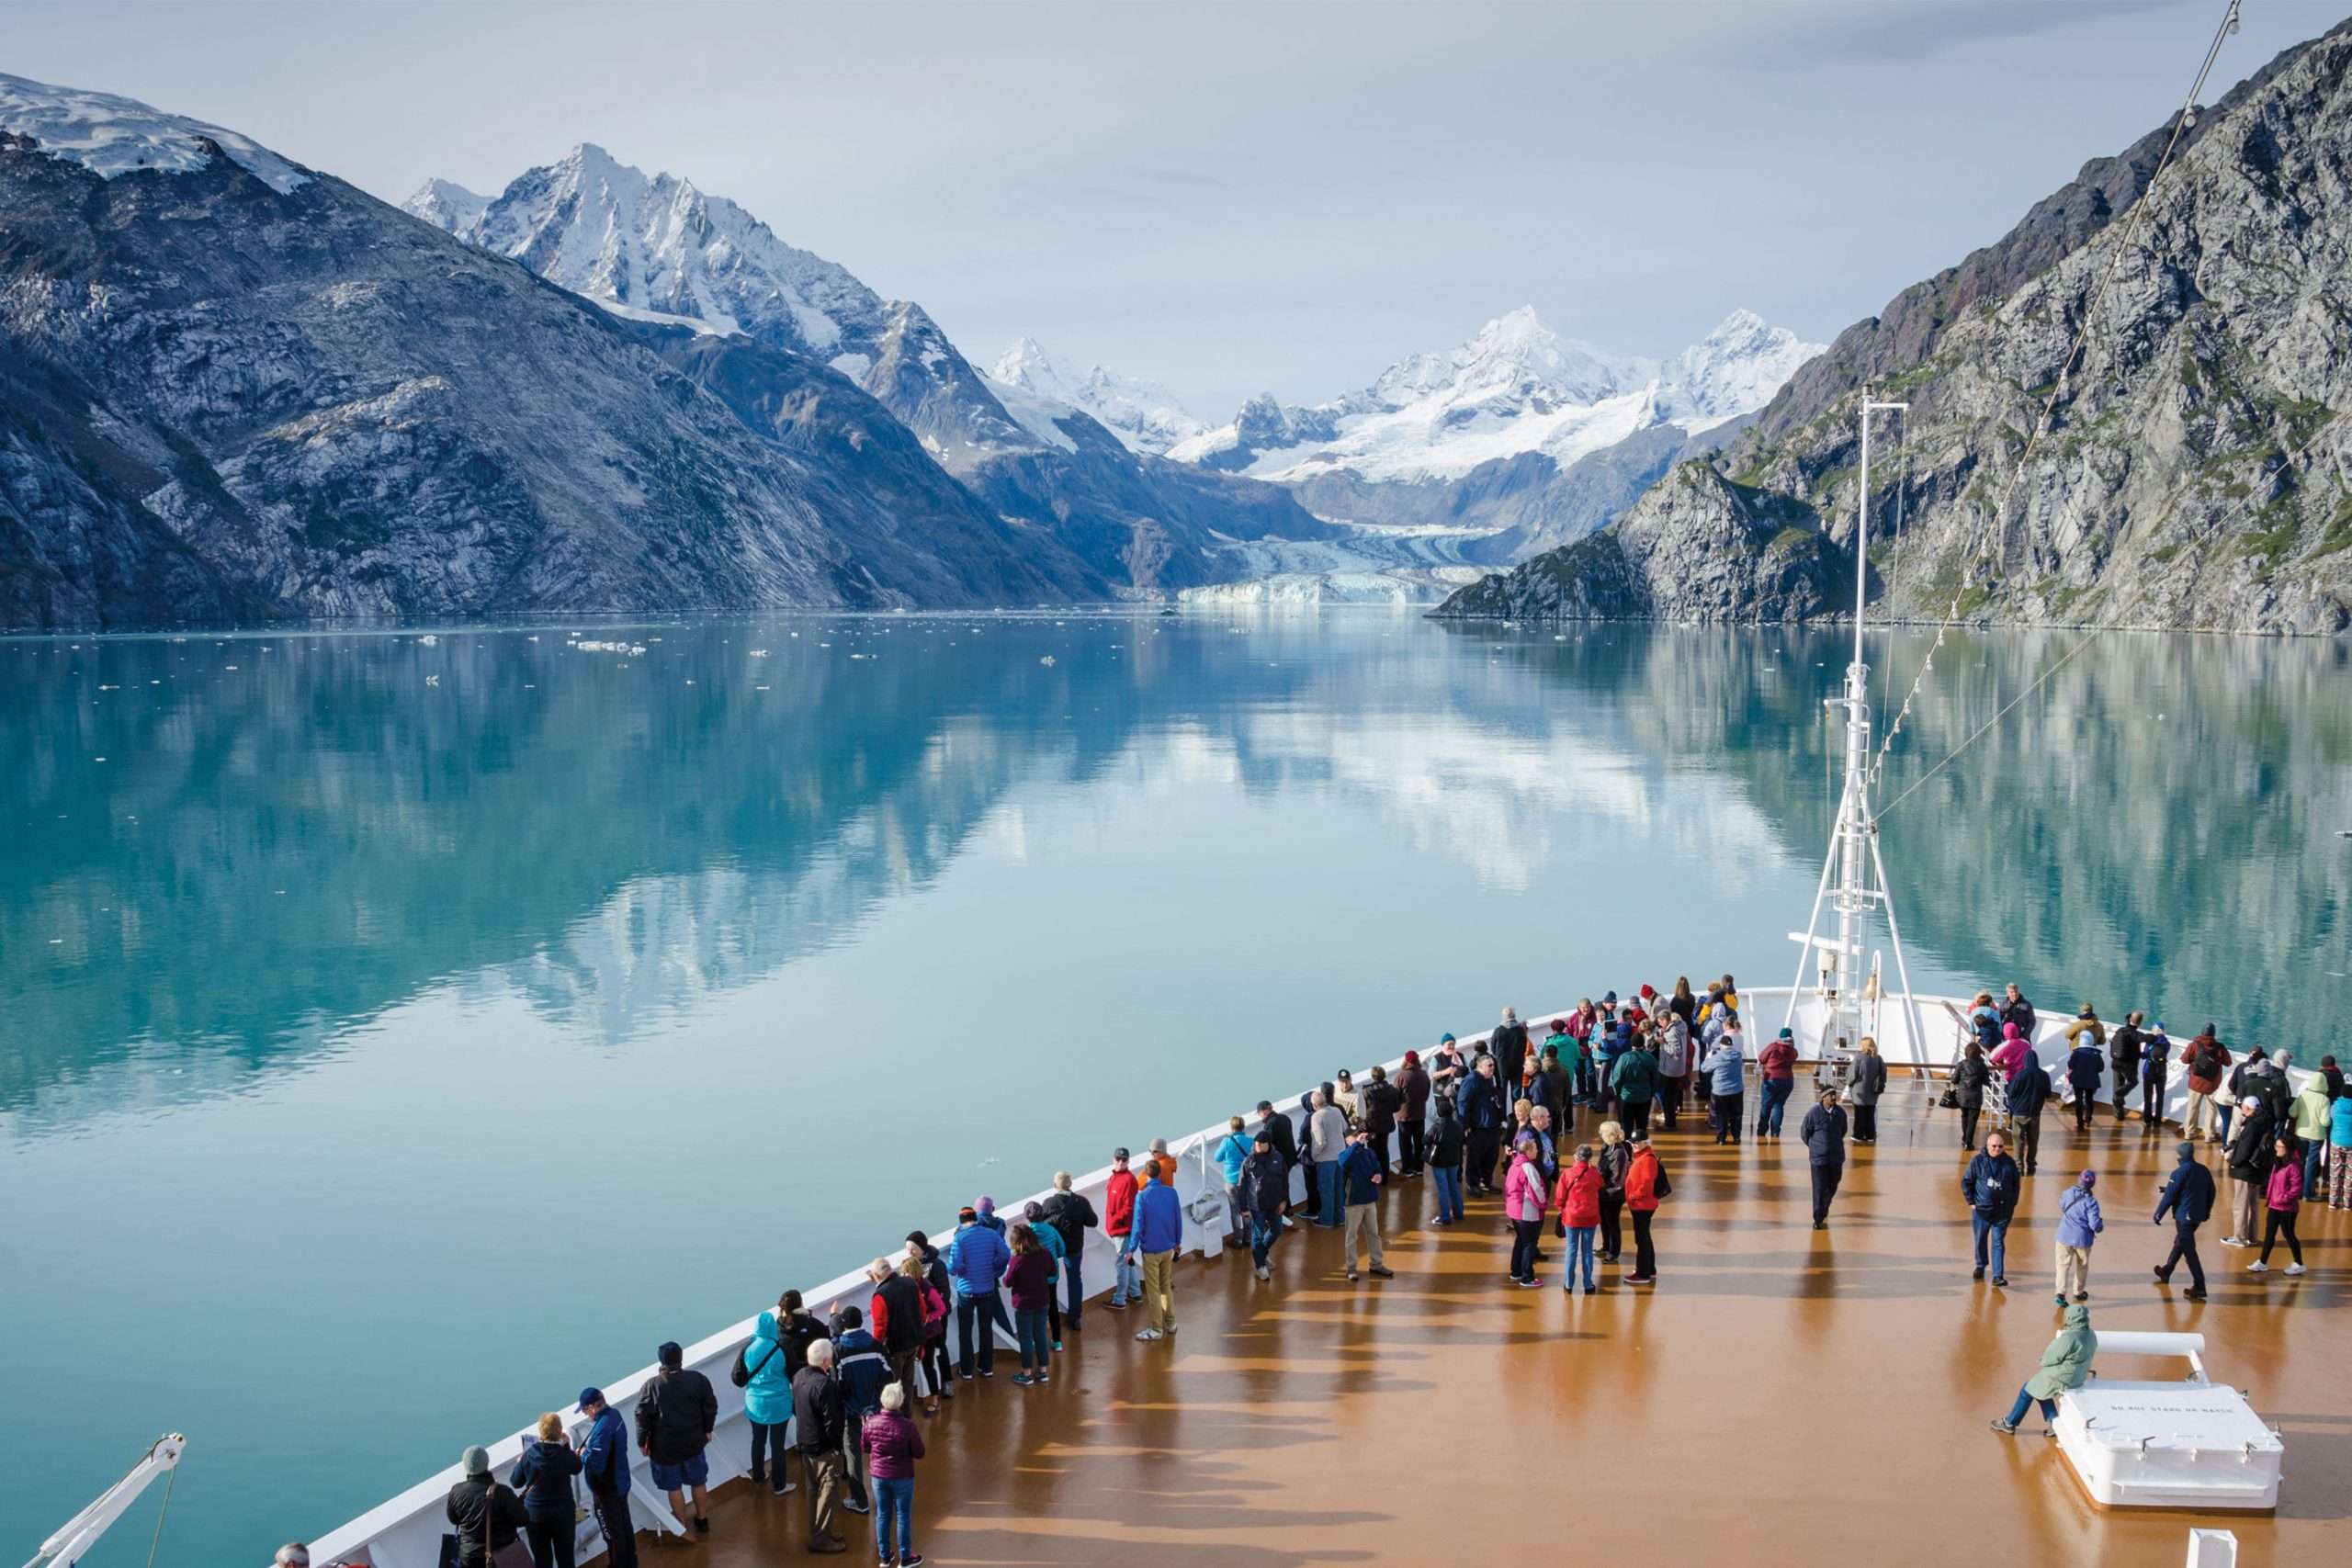 9 Things to See and Do on Your Alaskan Cruise